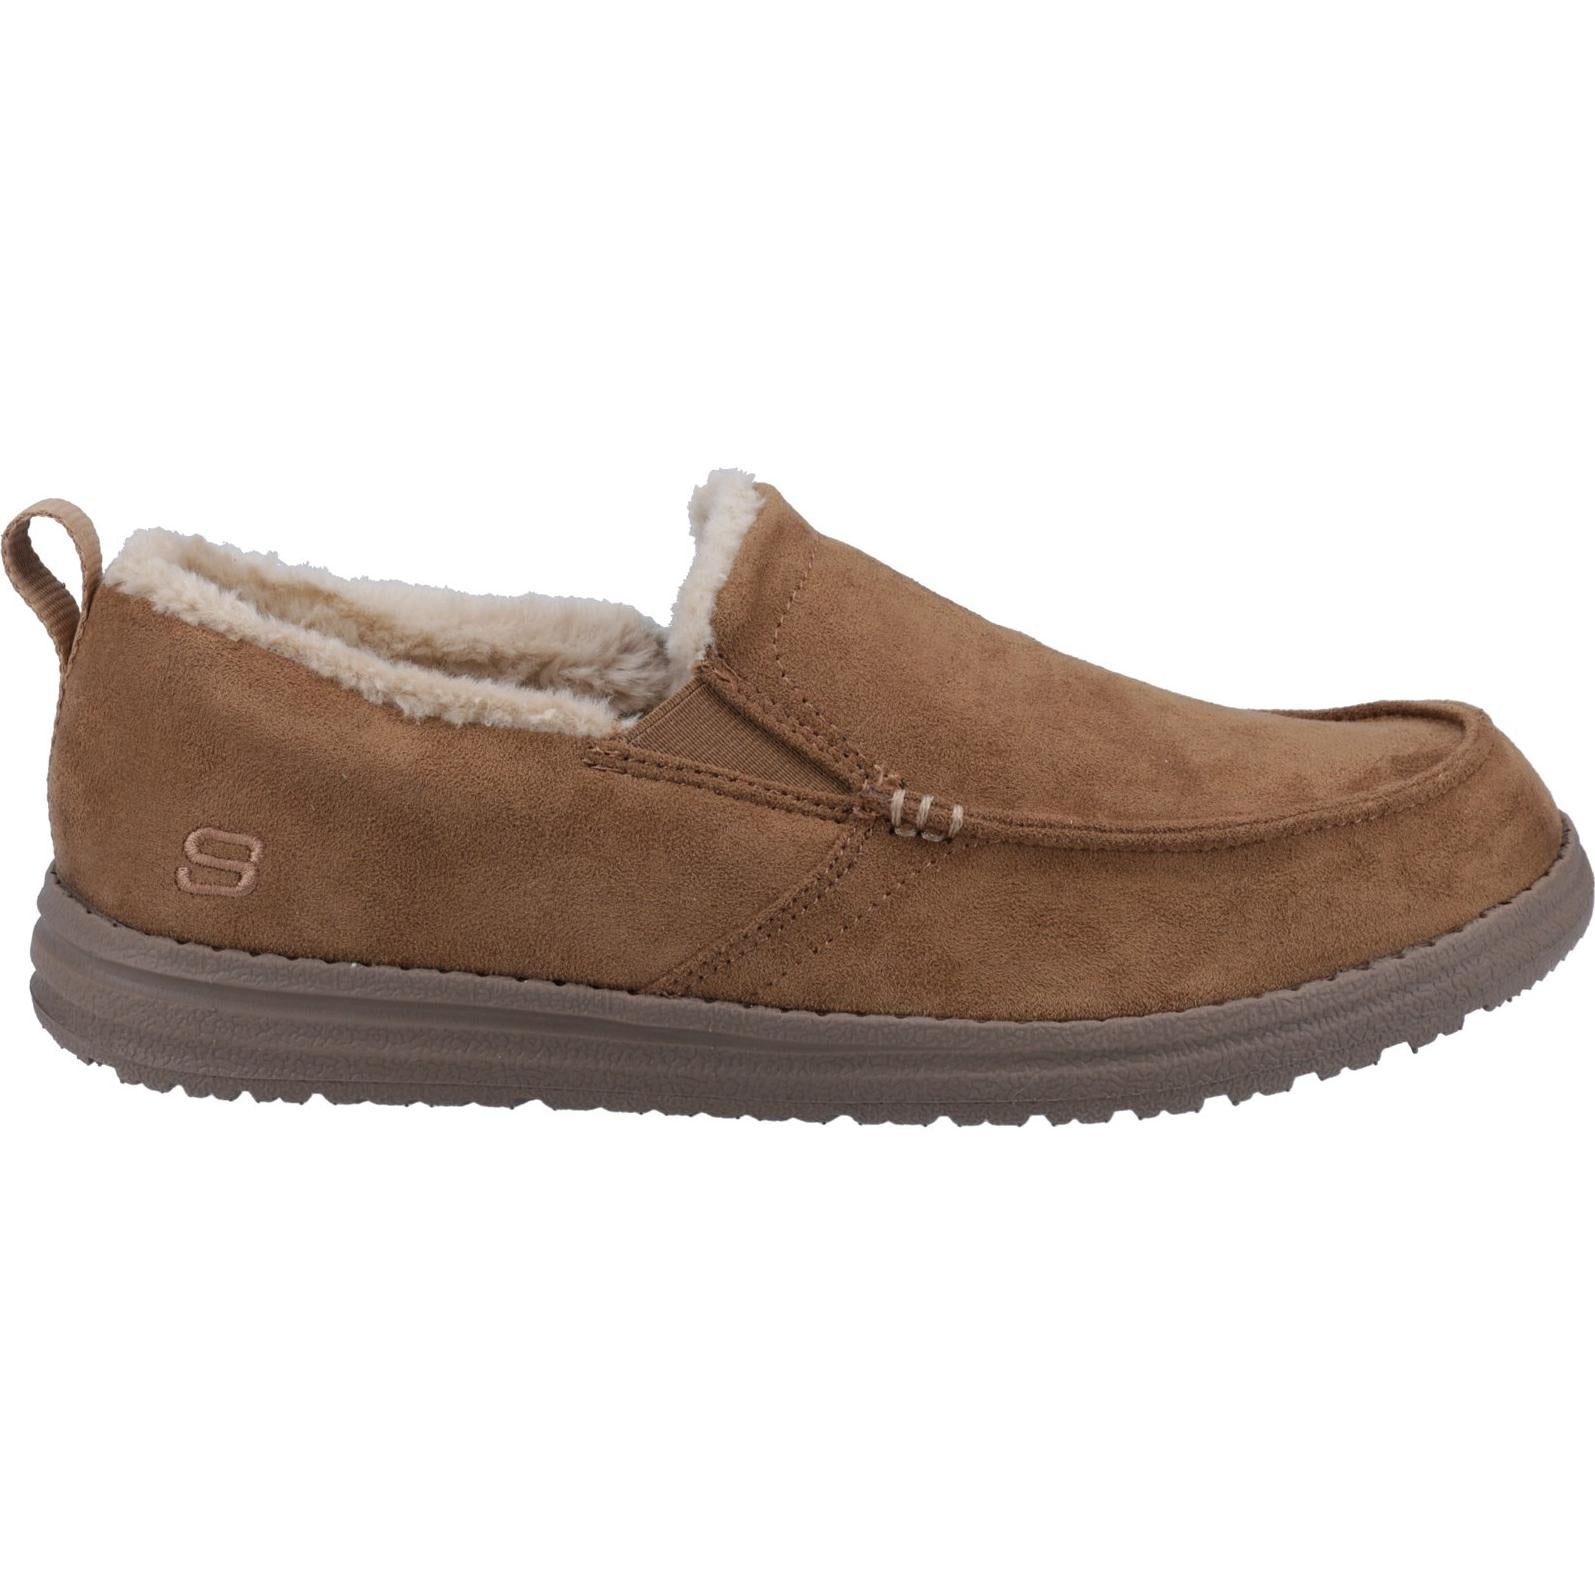 Skechers Relaxed Fit: Melson - Willmore Slipper